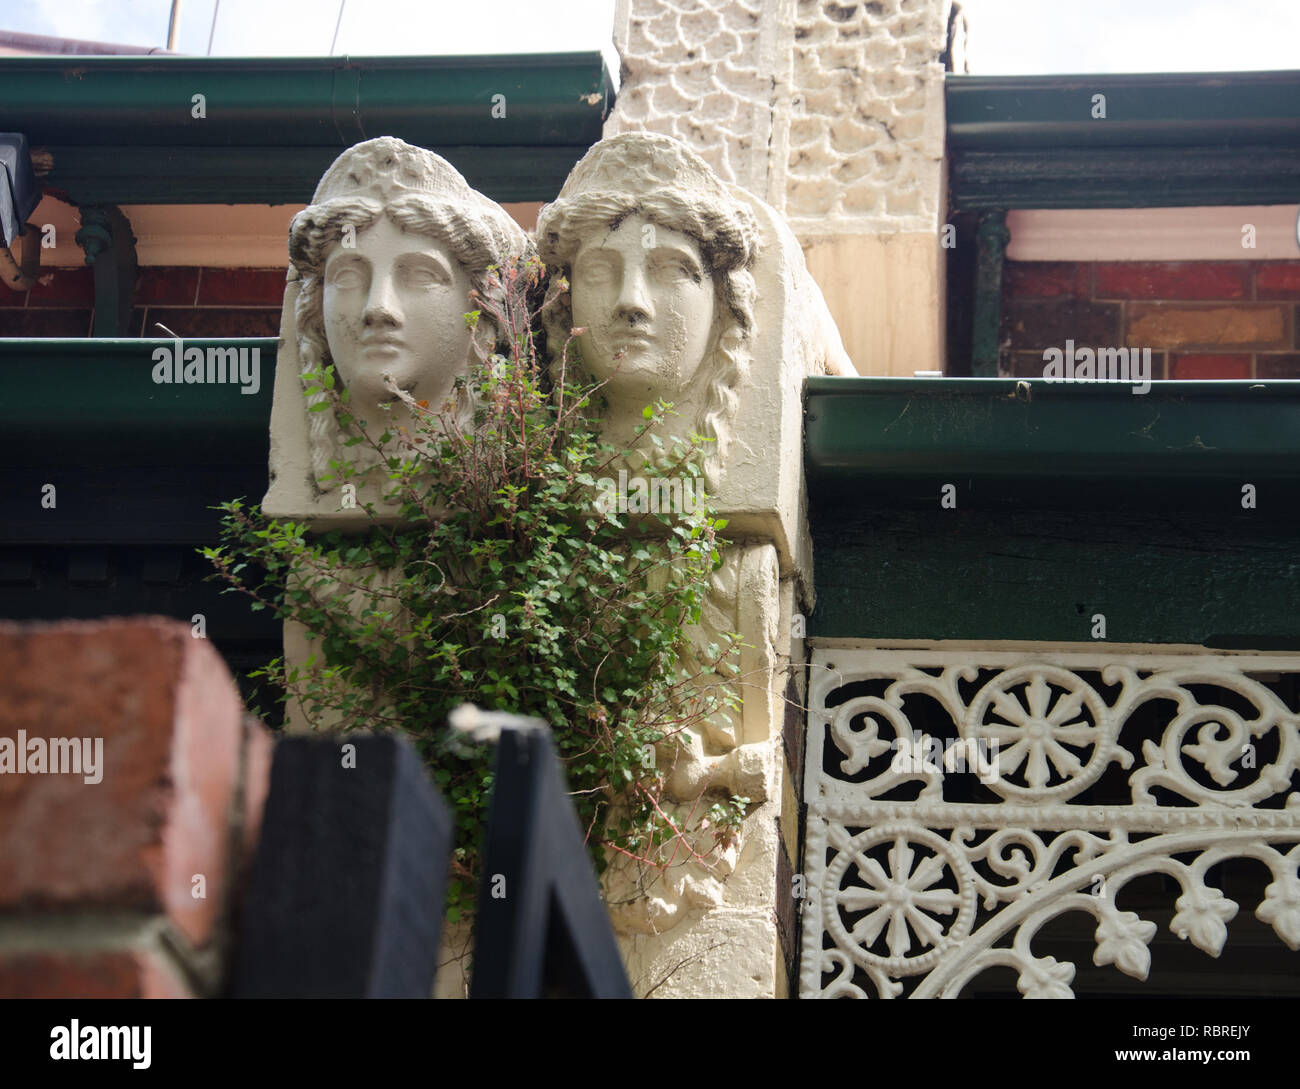 Enigmaticsculpted heads adorn the exterior of a tiny house in Melbourne's Fitroy neighbourhood where several streets are lined with small houses Stock Photo